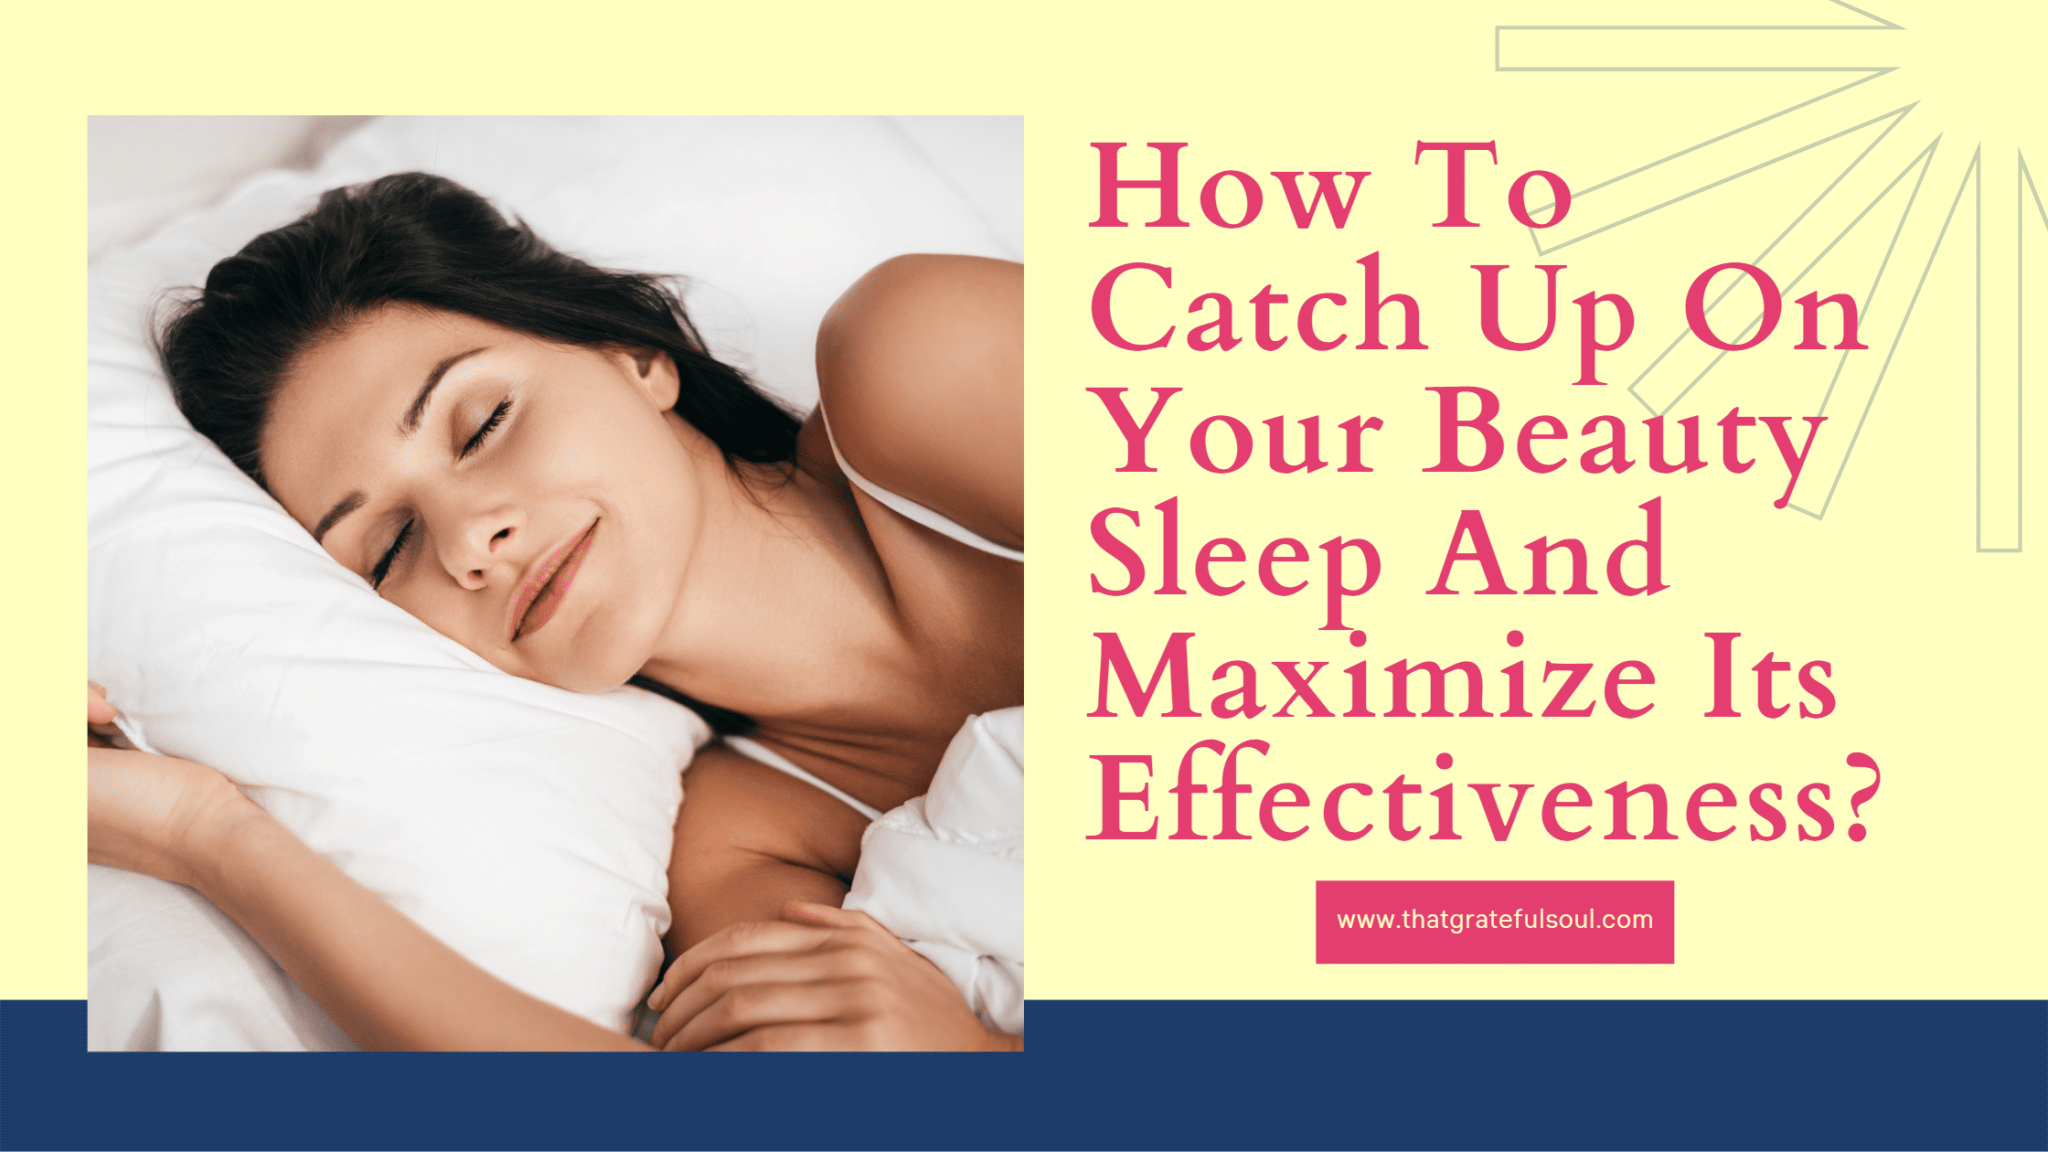 How To Catch Up On Your Beauty Sleep And Maximize Its Effectiveness?